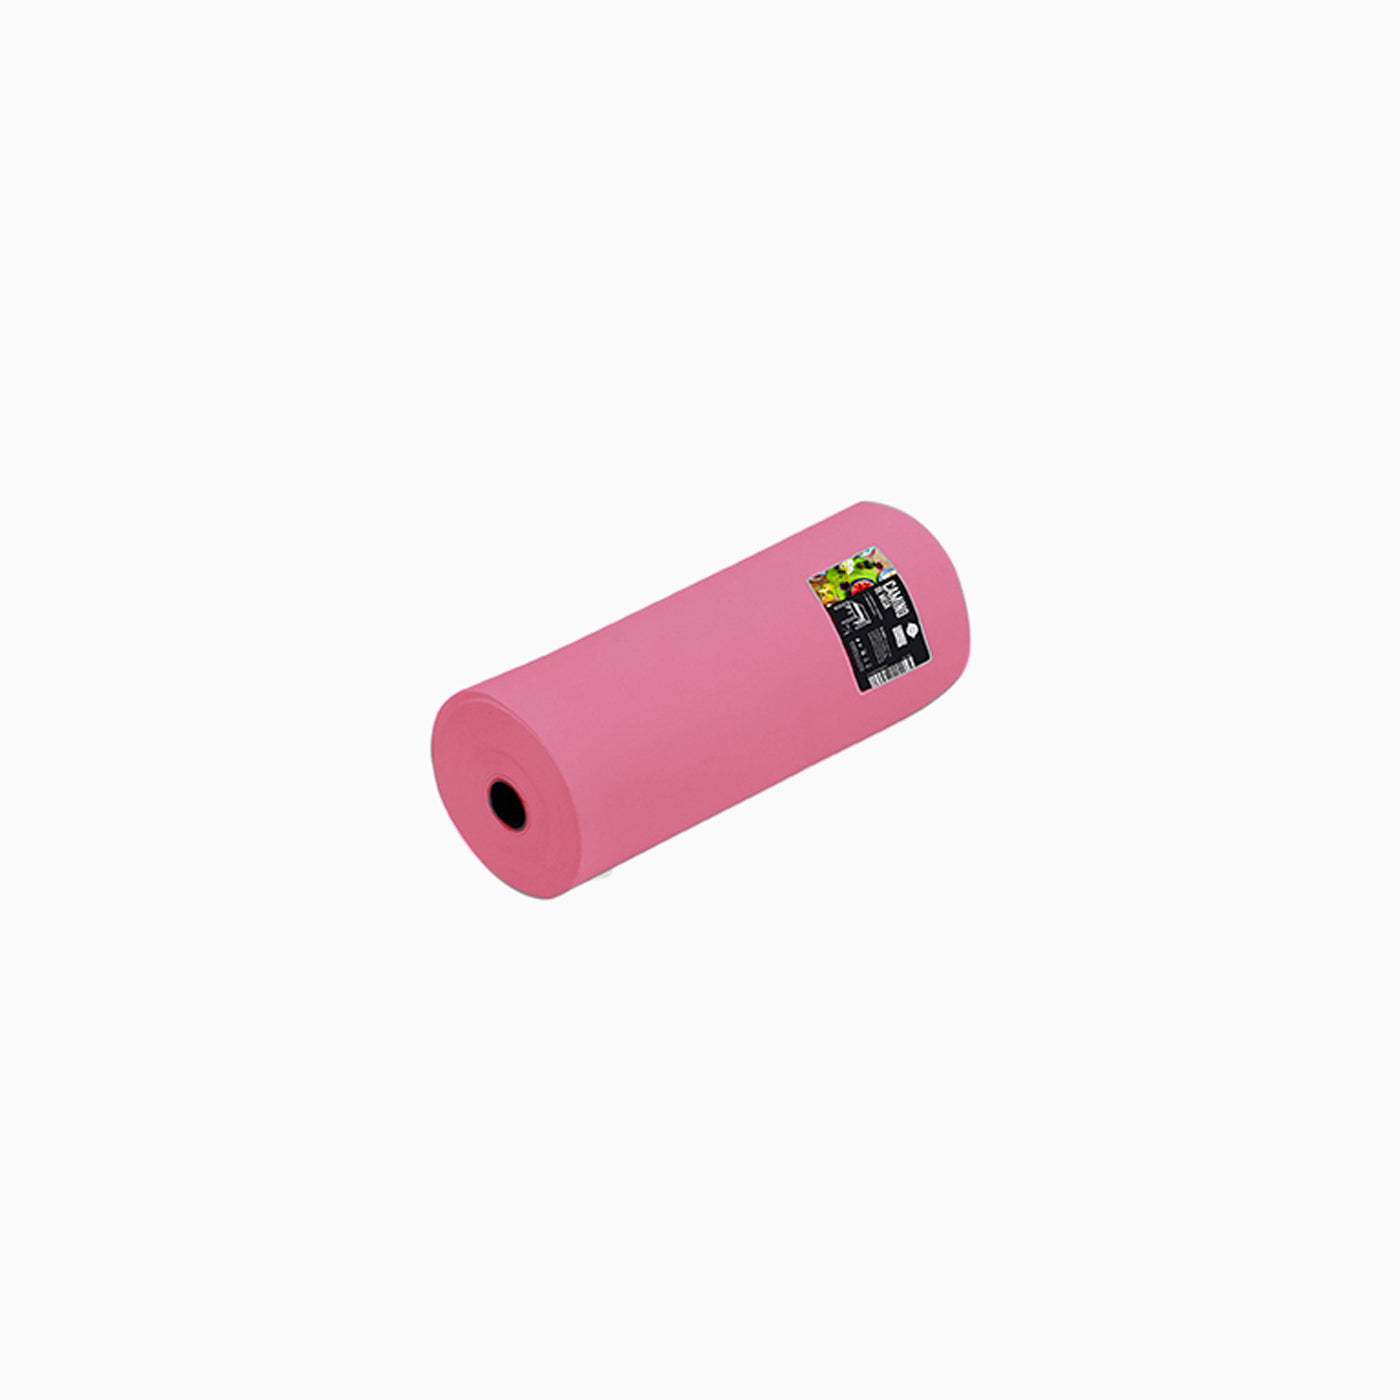 TNT Table Road Roll 12m with Precort at 0.30cm Pastel Pink